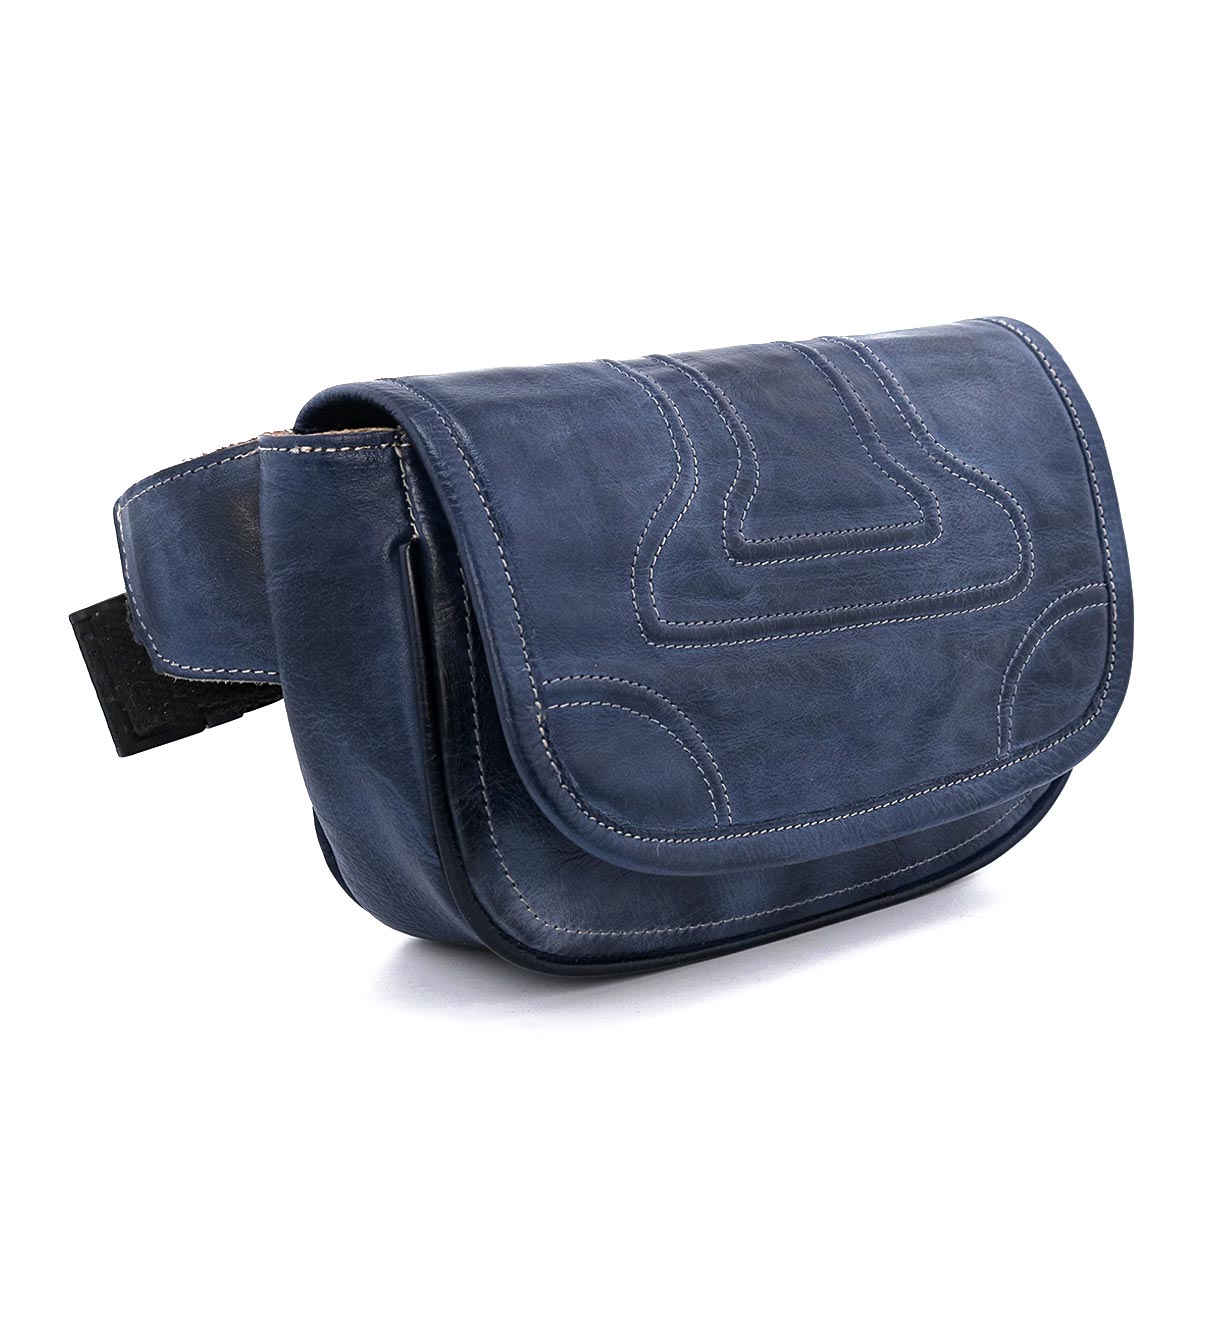 A Travers leather belt bag with an adjustable strap. (Brand name: Bed Stu)